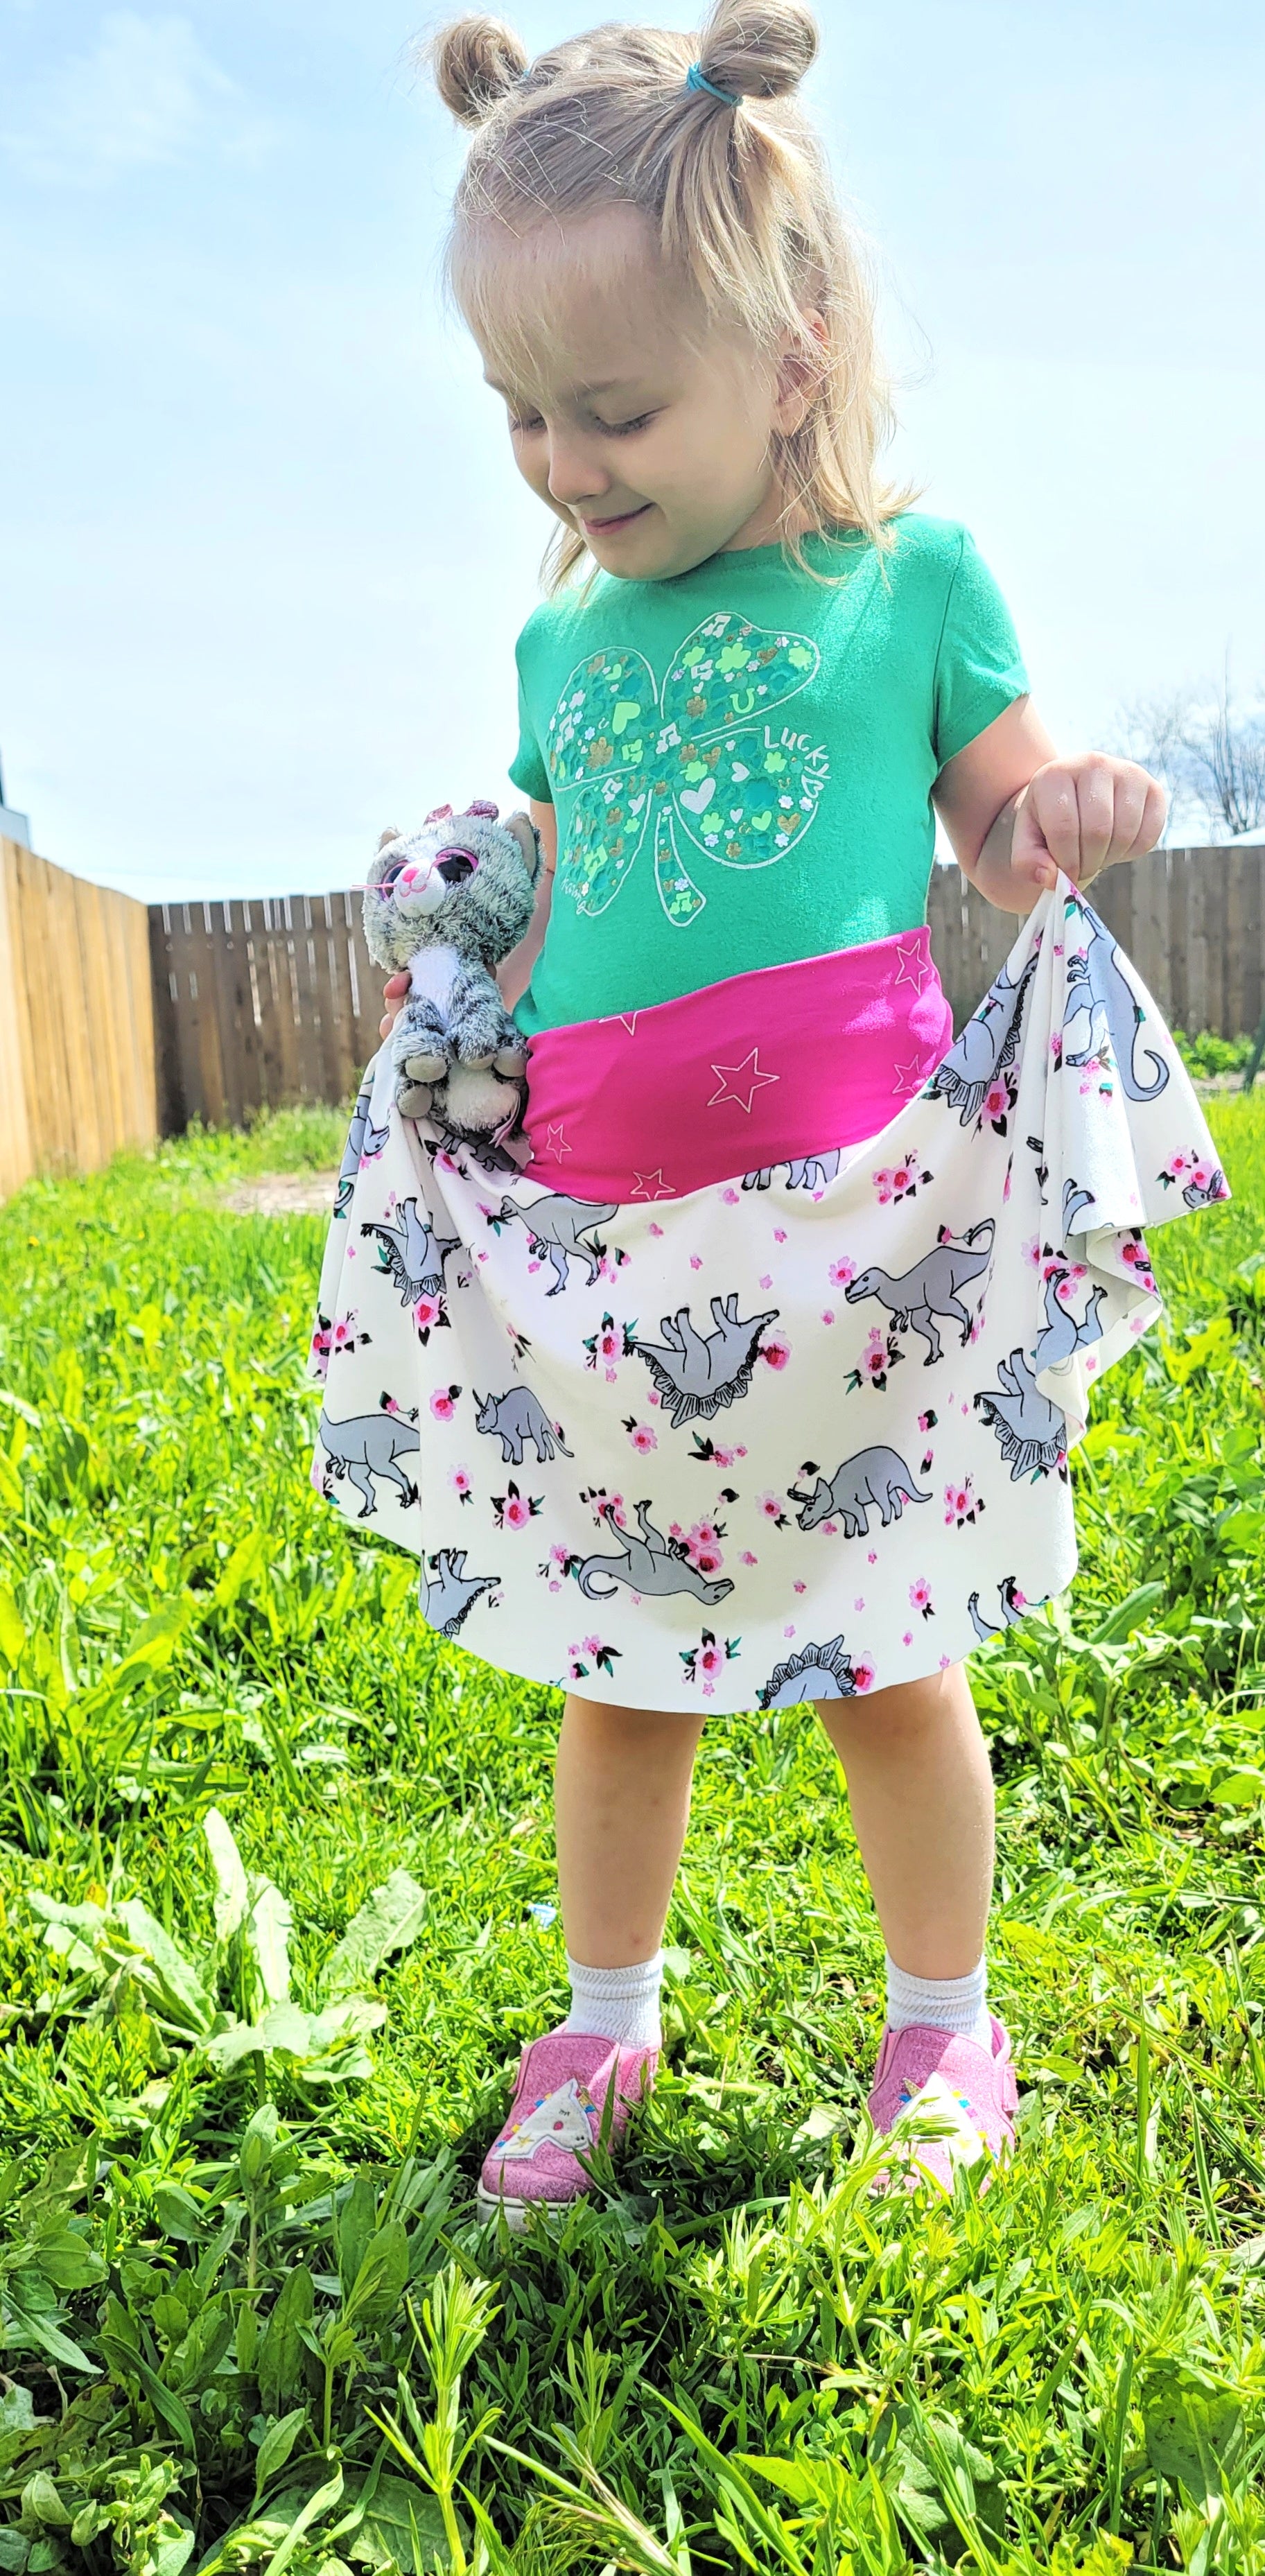 Gymnastics and Dance Shorts 3 Kids Sewing Pattern in Girls Sizes 2-14